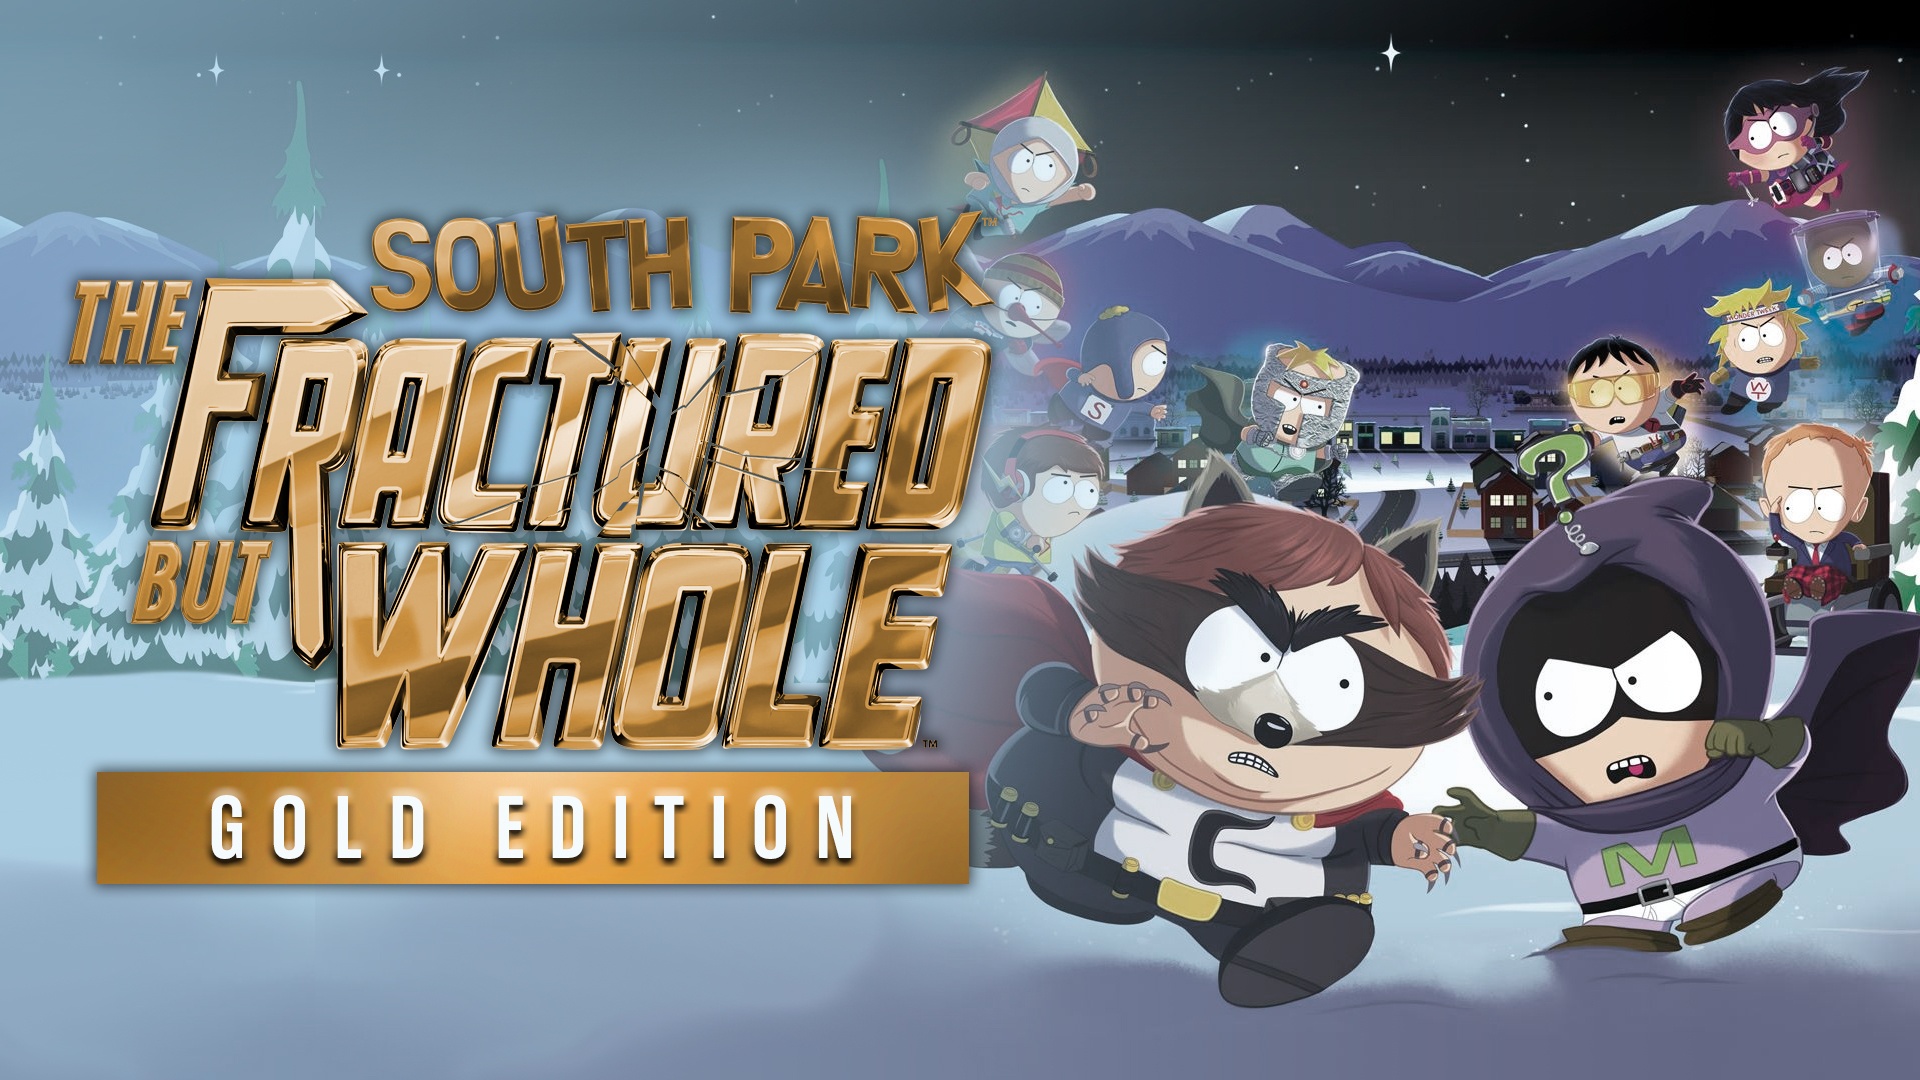 South park the fractured but whole купить ключ steam дешево (120) фото